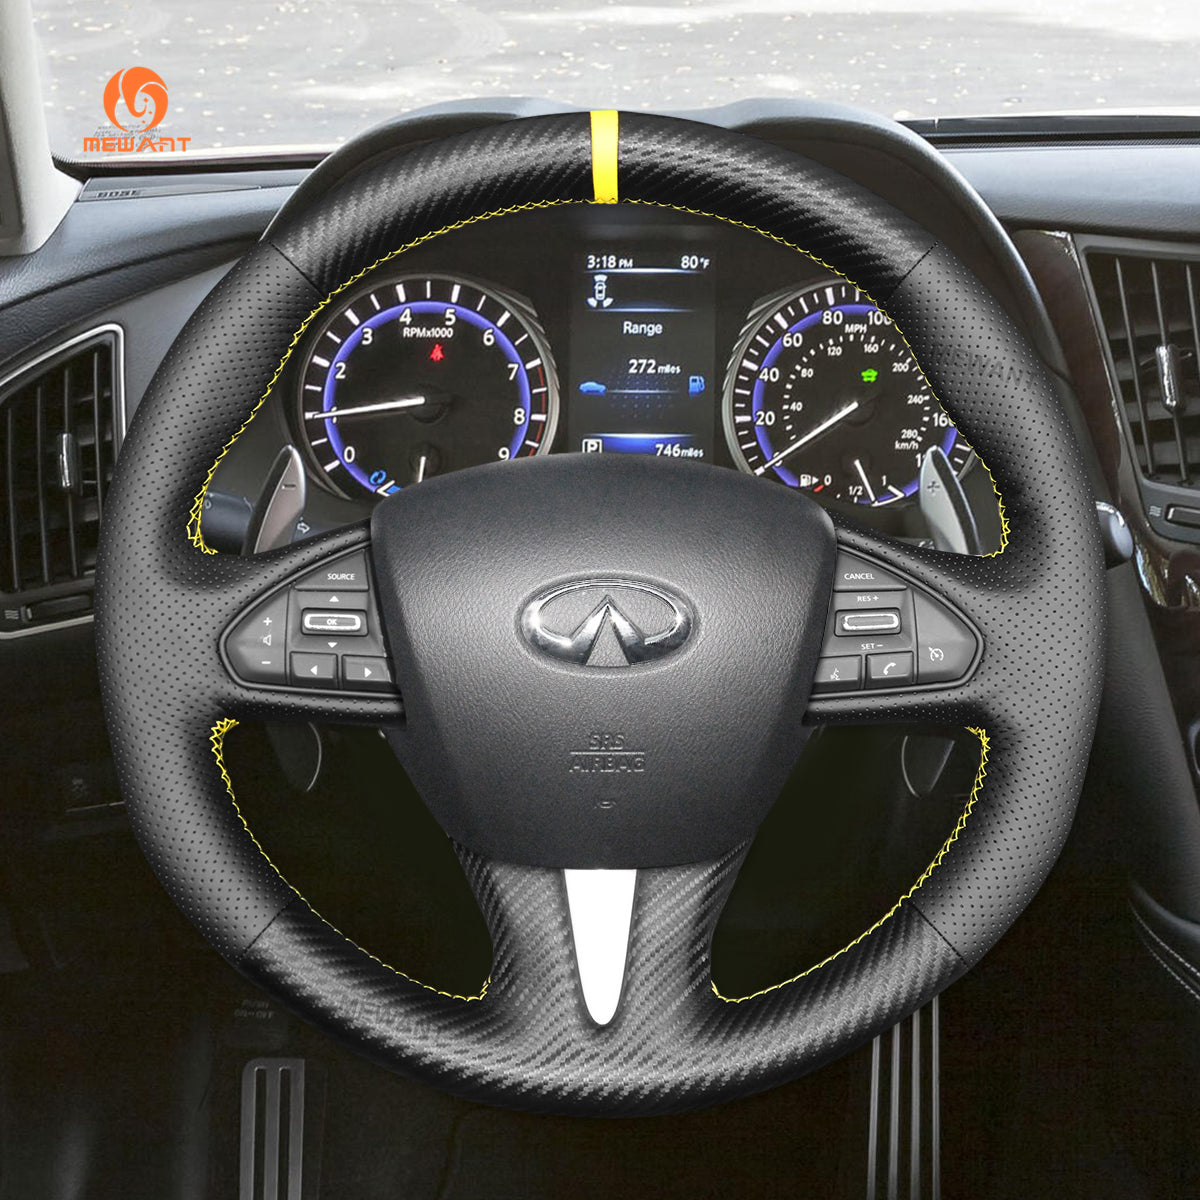 MEWANT Carbon Fiber Leather Car Steering Wheel Cover for Infiniti Q50 2014-2017 / QX50 2015-2017